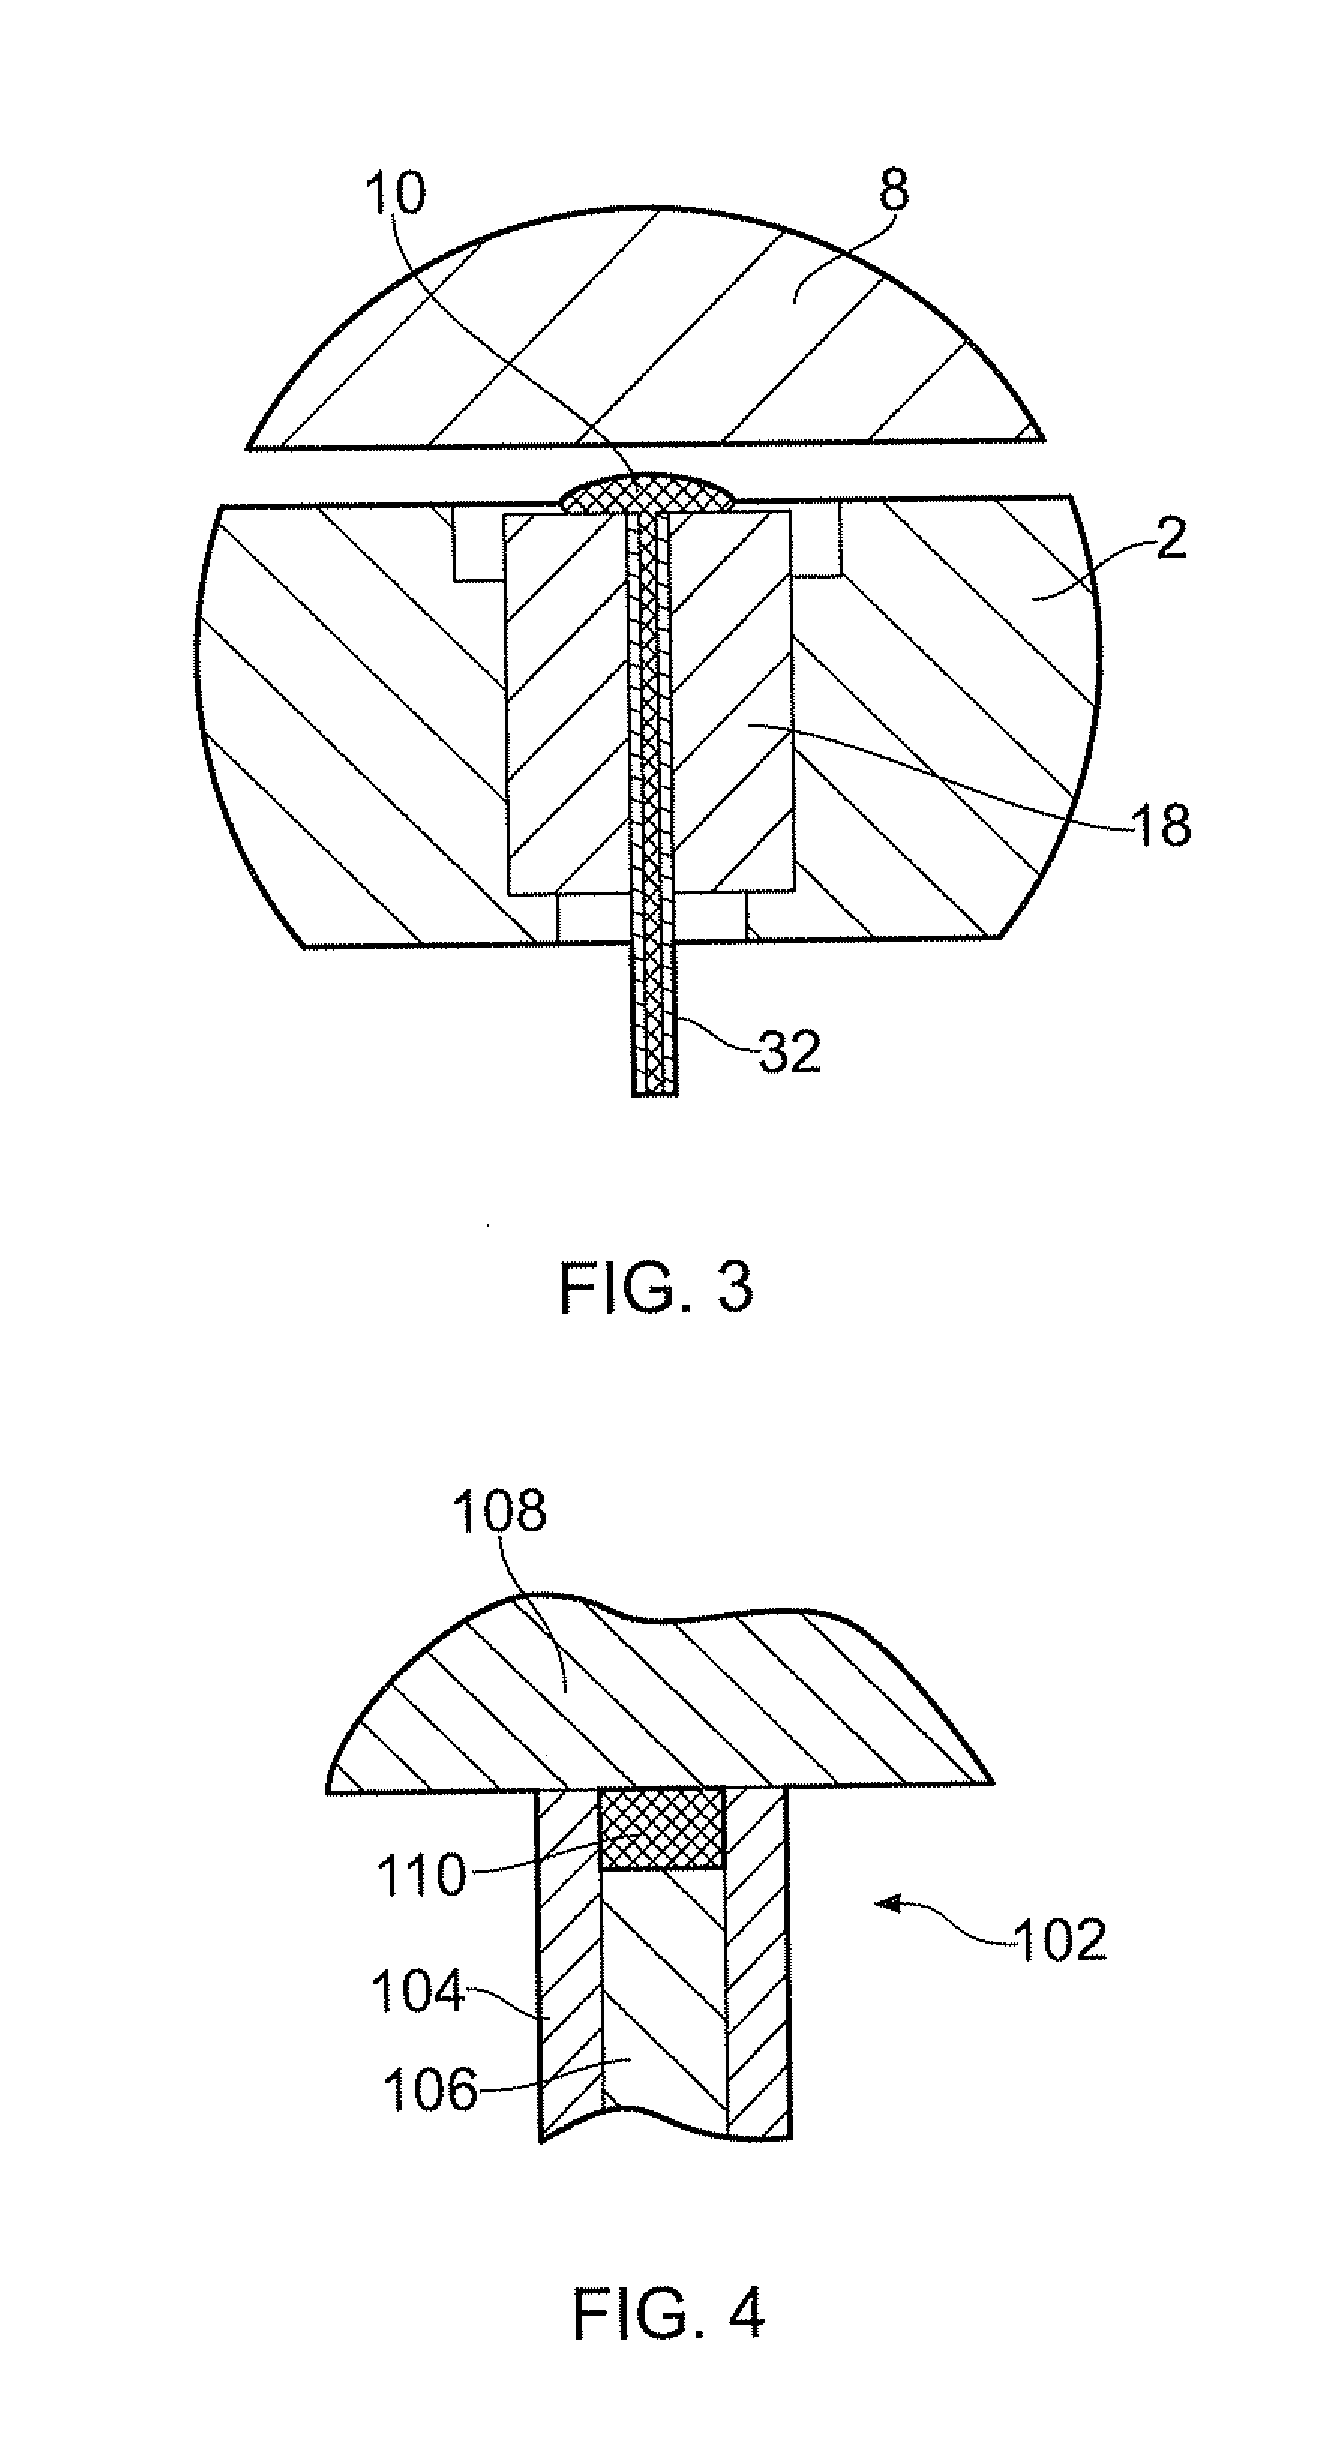 Adhesive fastening elements for holding a workpiece and methods of de-bonding a workpiece from an adhesive fastening element